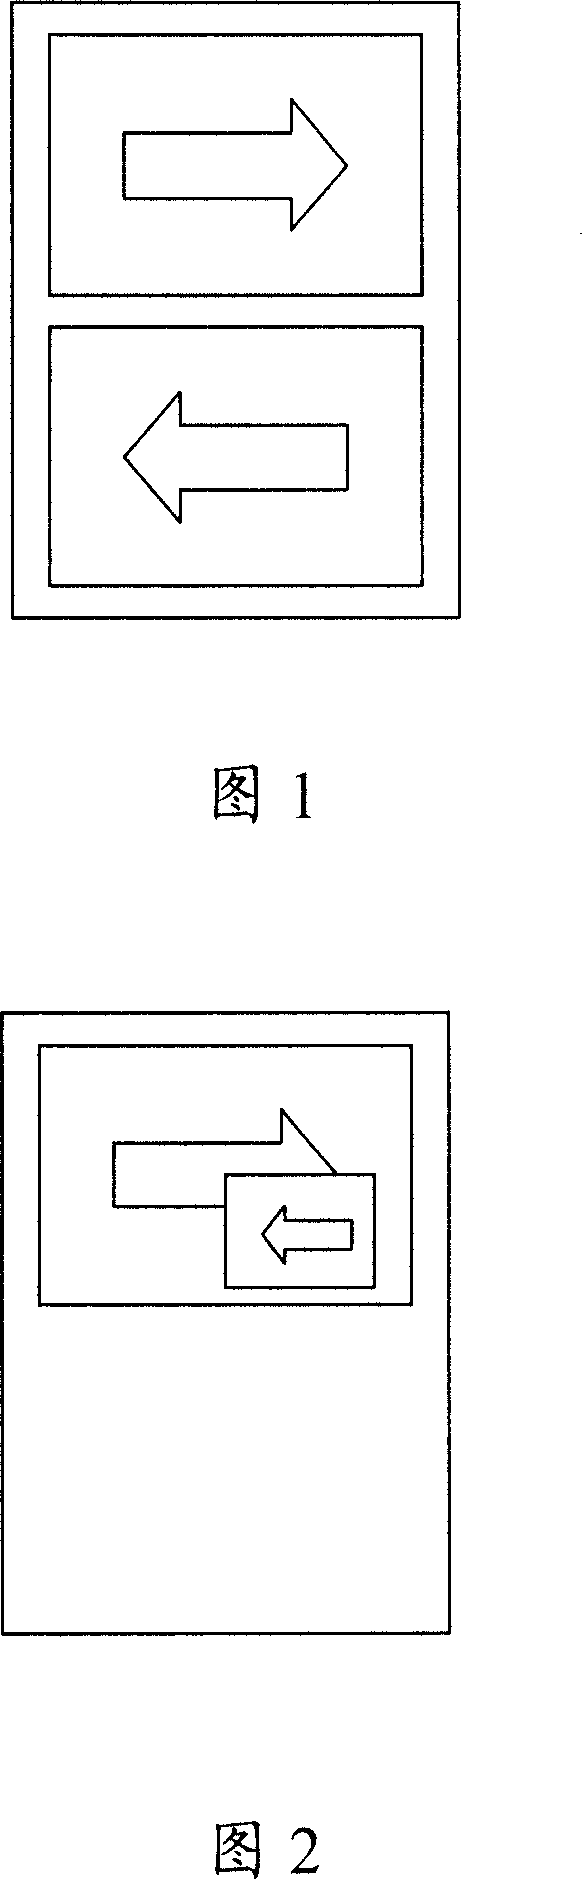 A control apparatus and method for video communication picture display